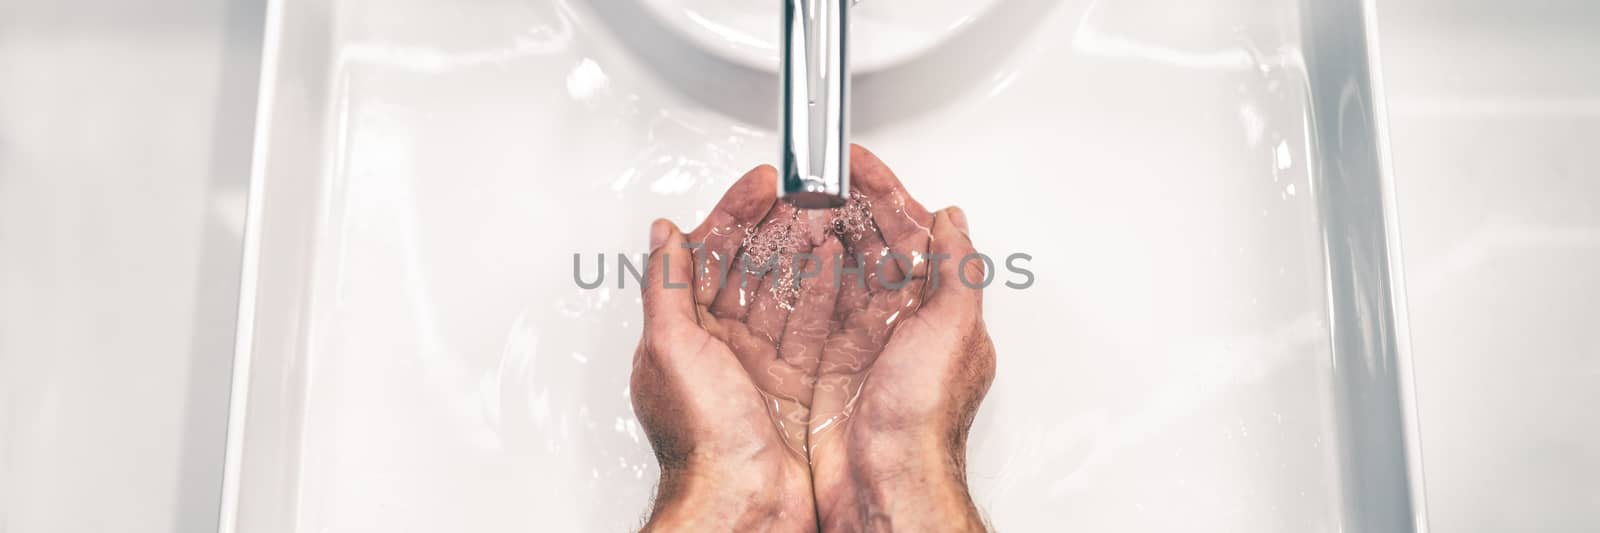 COVID-19 Coronavirus prevention washing hands with soap at bathroom sink man hand hygiene for corona virus pandemic precaution by washing hands frequently for 20 seconds. Panoramic banner by Maridav